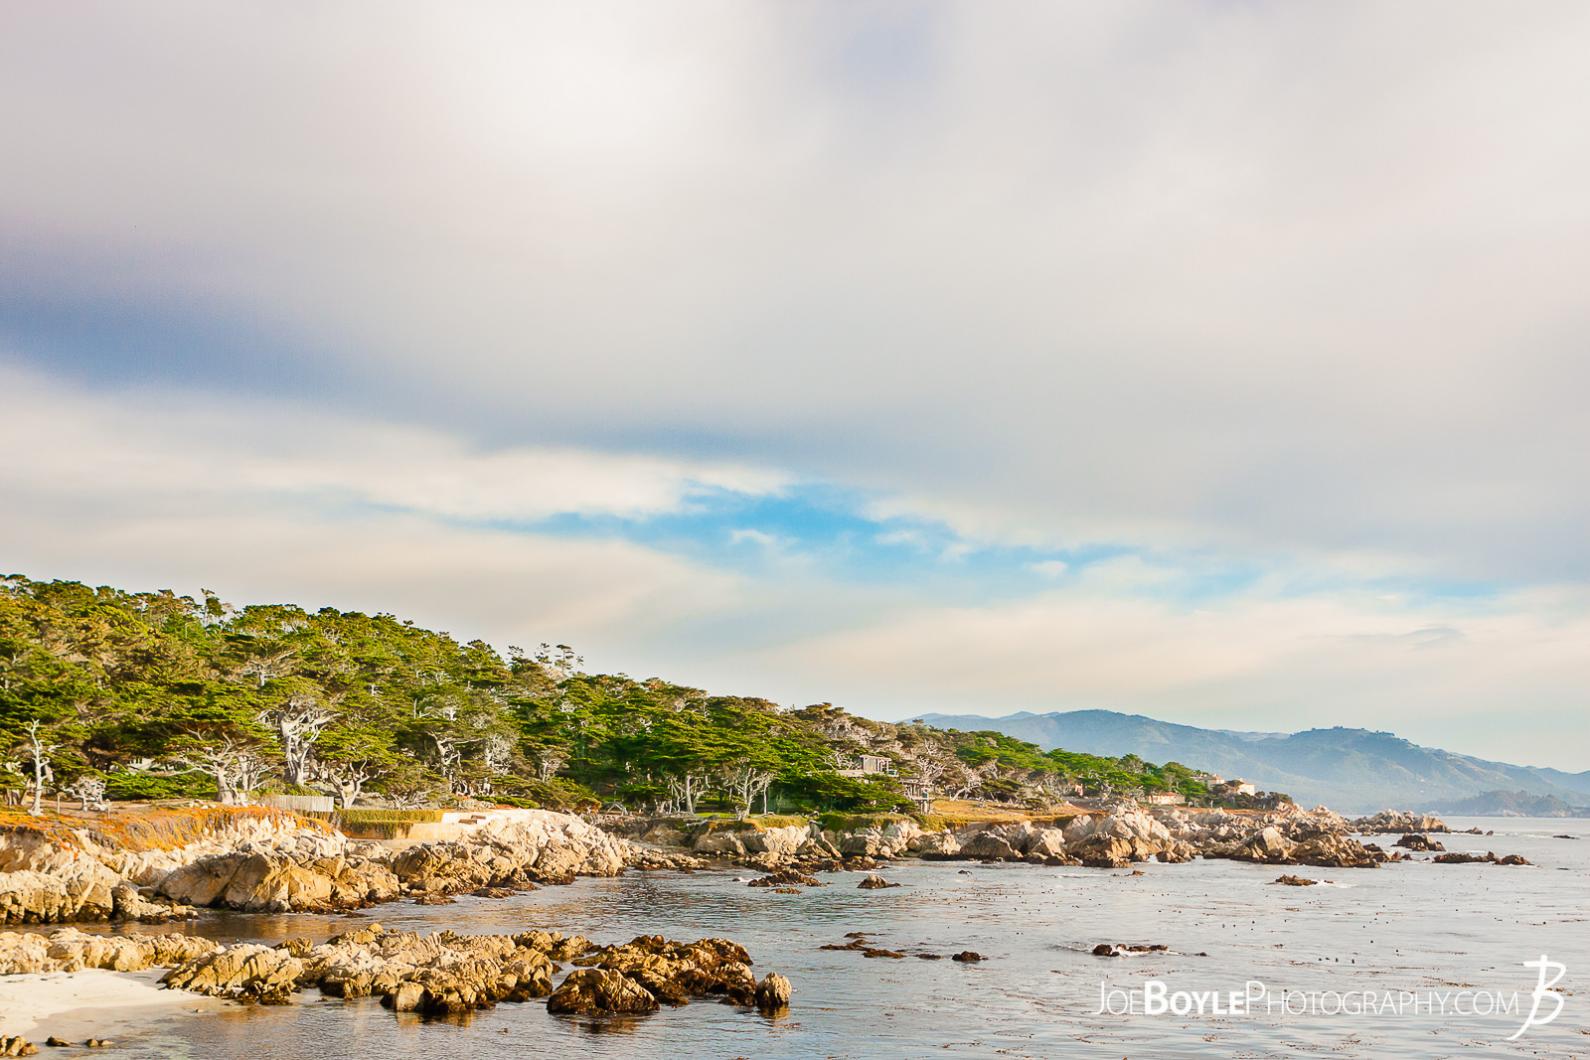 My friends and I were driving on the 17 Mile Drive on our way to Carmel by the Sea. We stopped a few times along the way to take some photos. Here is a picture of the coastline with those cool rocks.